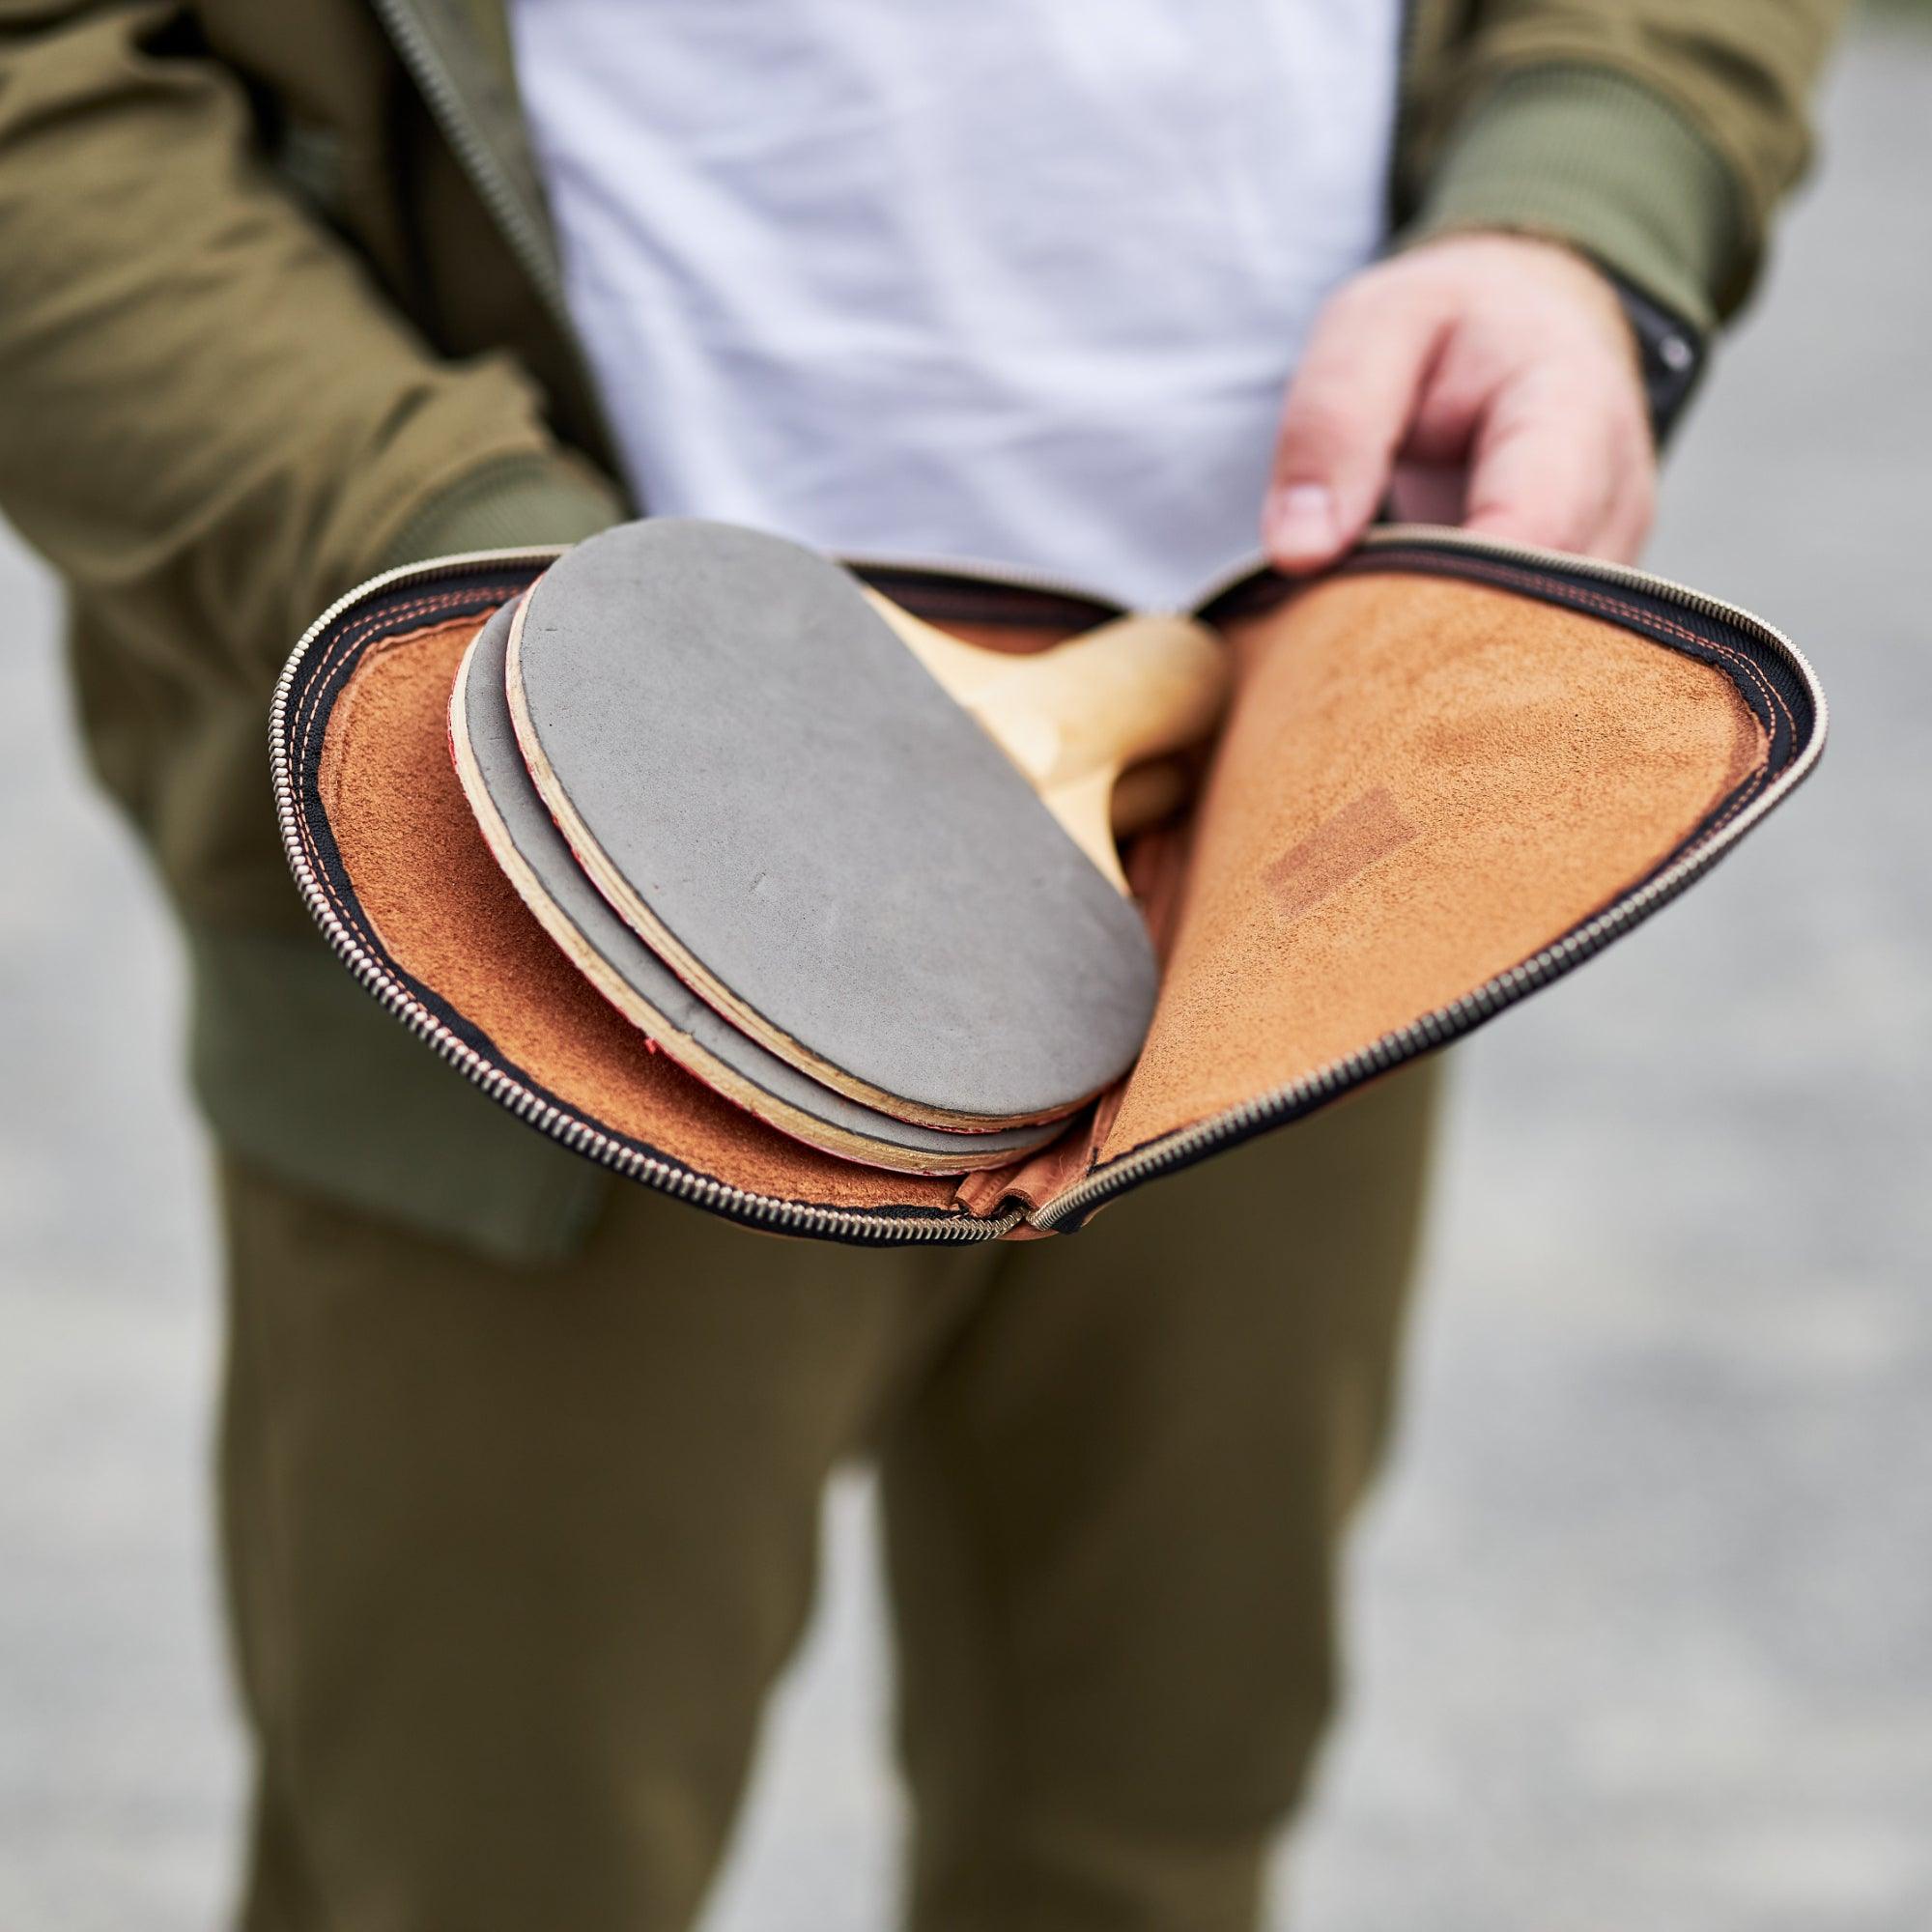 Leather Ping Pong Case